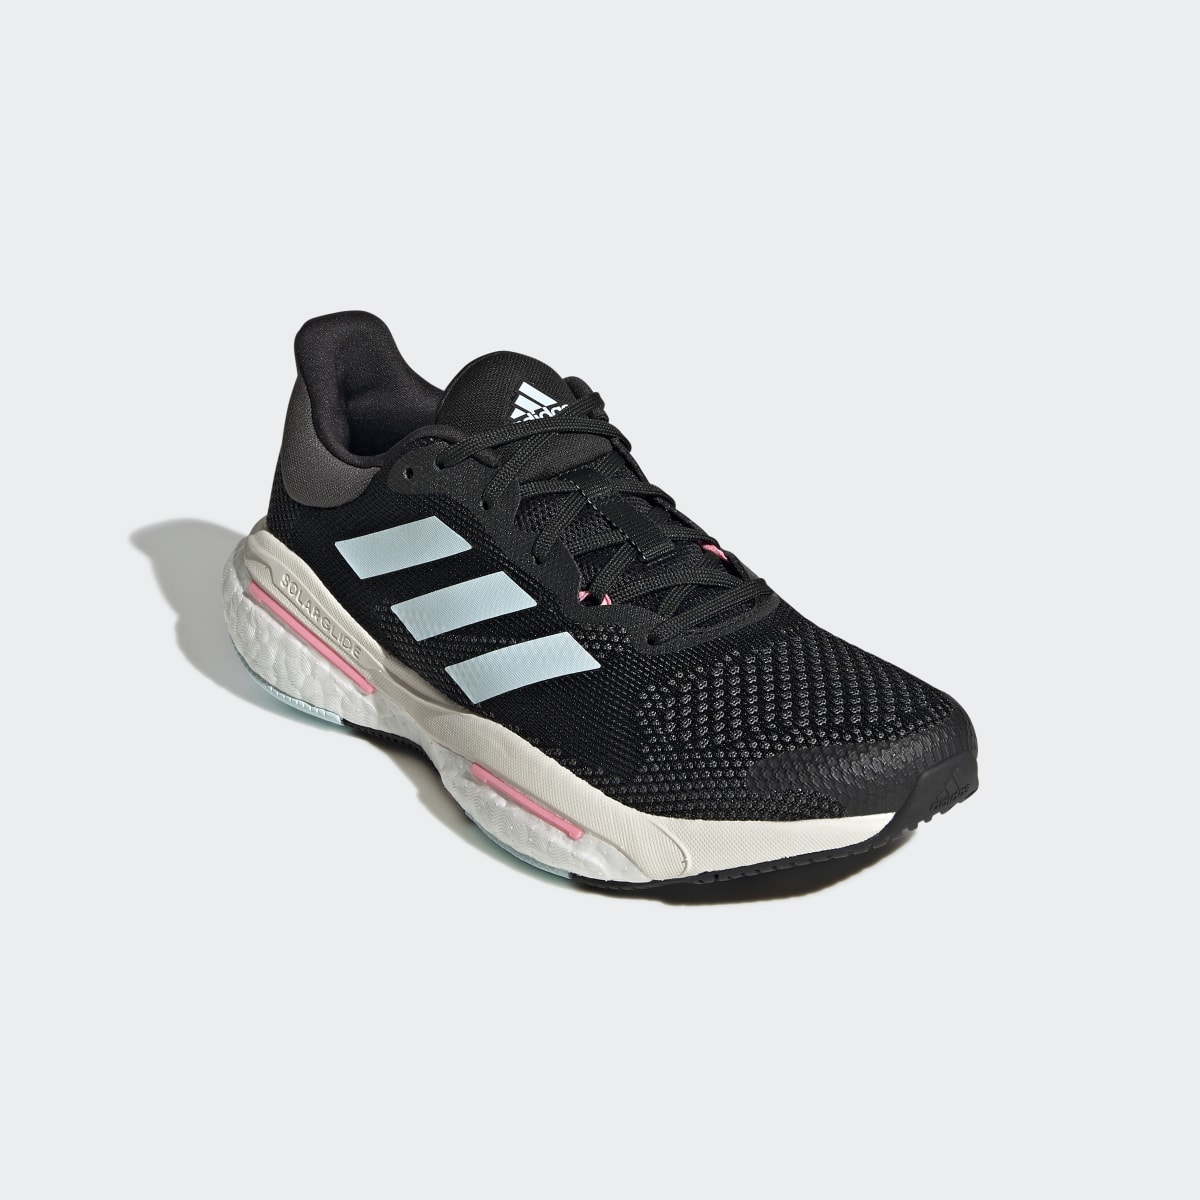 Adidas Solarglide 5 Running Shoes. 5